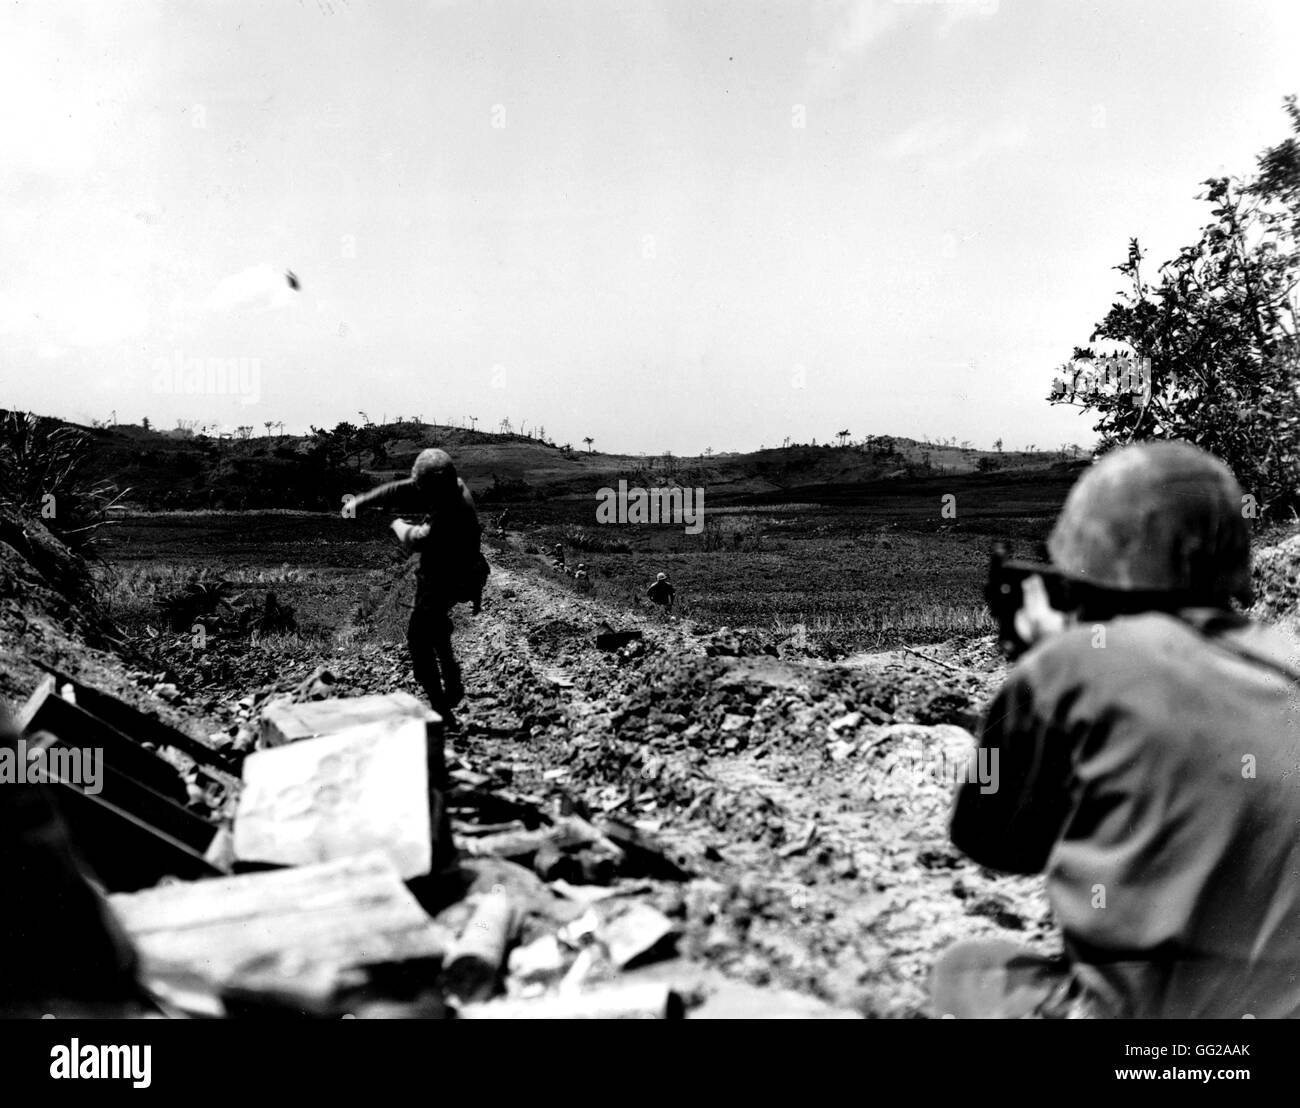 The Pacific War in Okinawa: American Marine throwing a grenade towards the Japanese lines May 6, 1945 Japan - World War II U.S. marines corps photograph Stock Photo